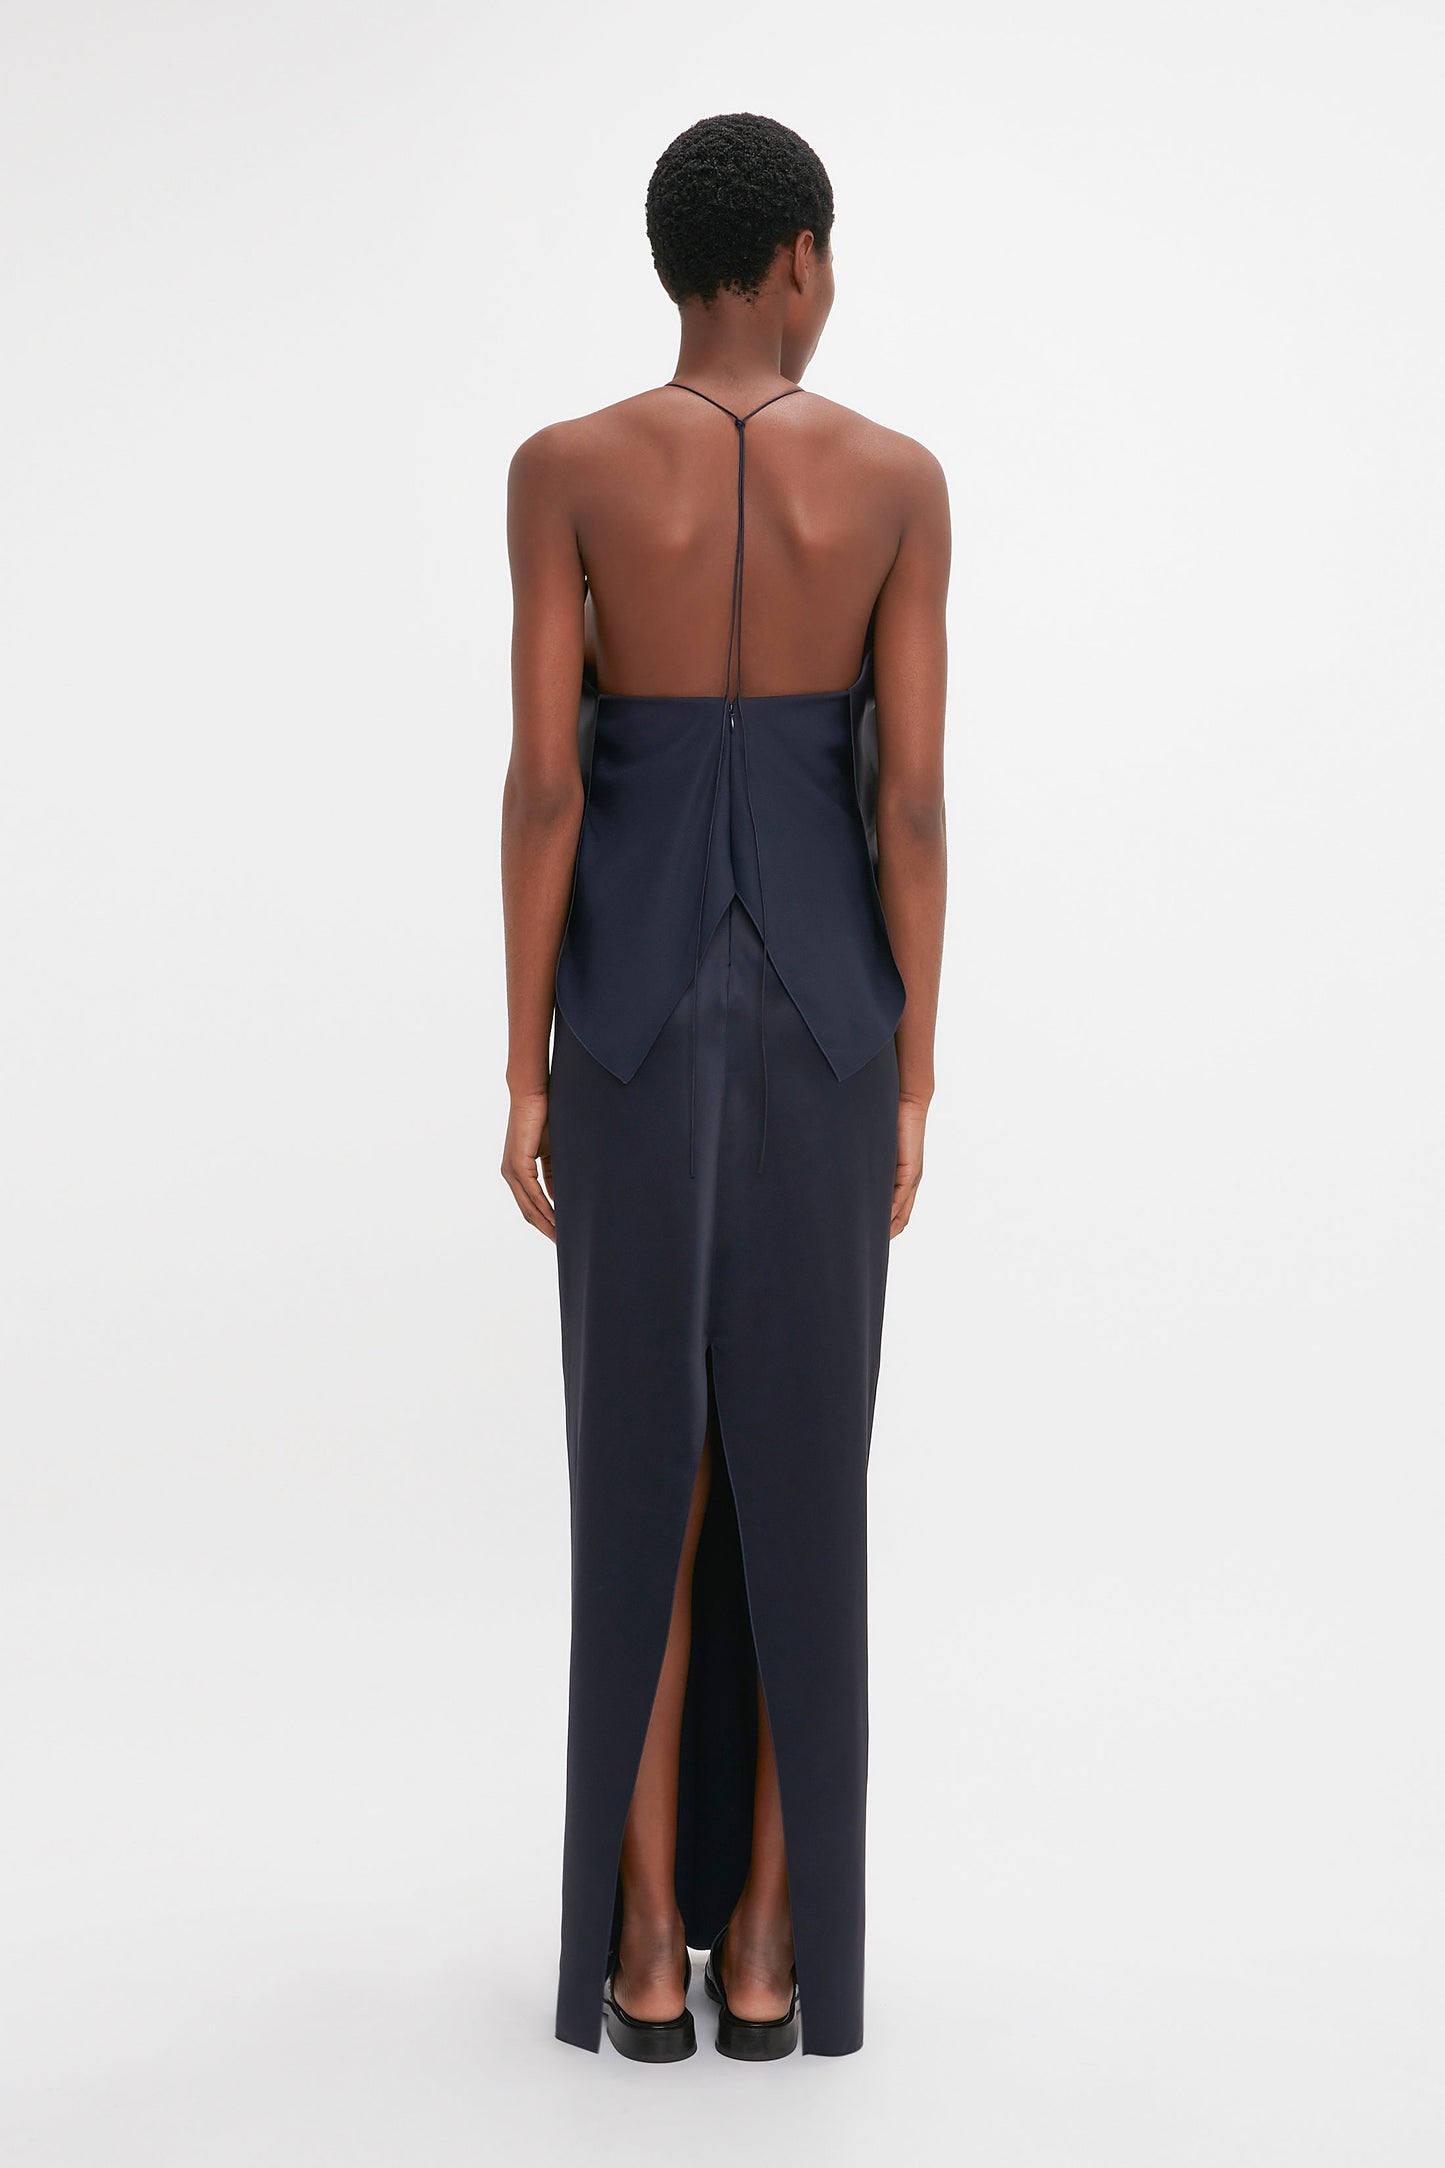 A woman wearing an elegant Victoria Beckham Frame Detail Cut-Out Cami Dress in Navy stands with her back to the camera on a white background.